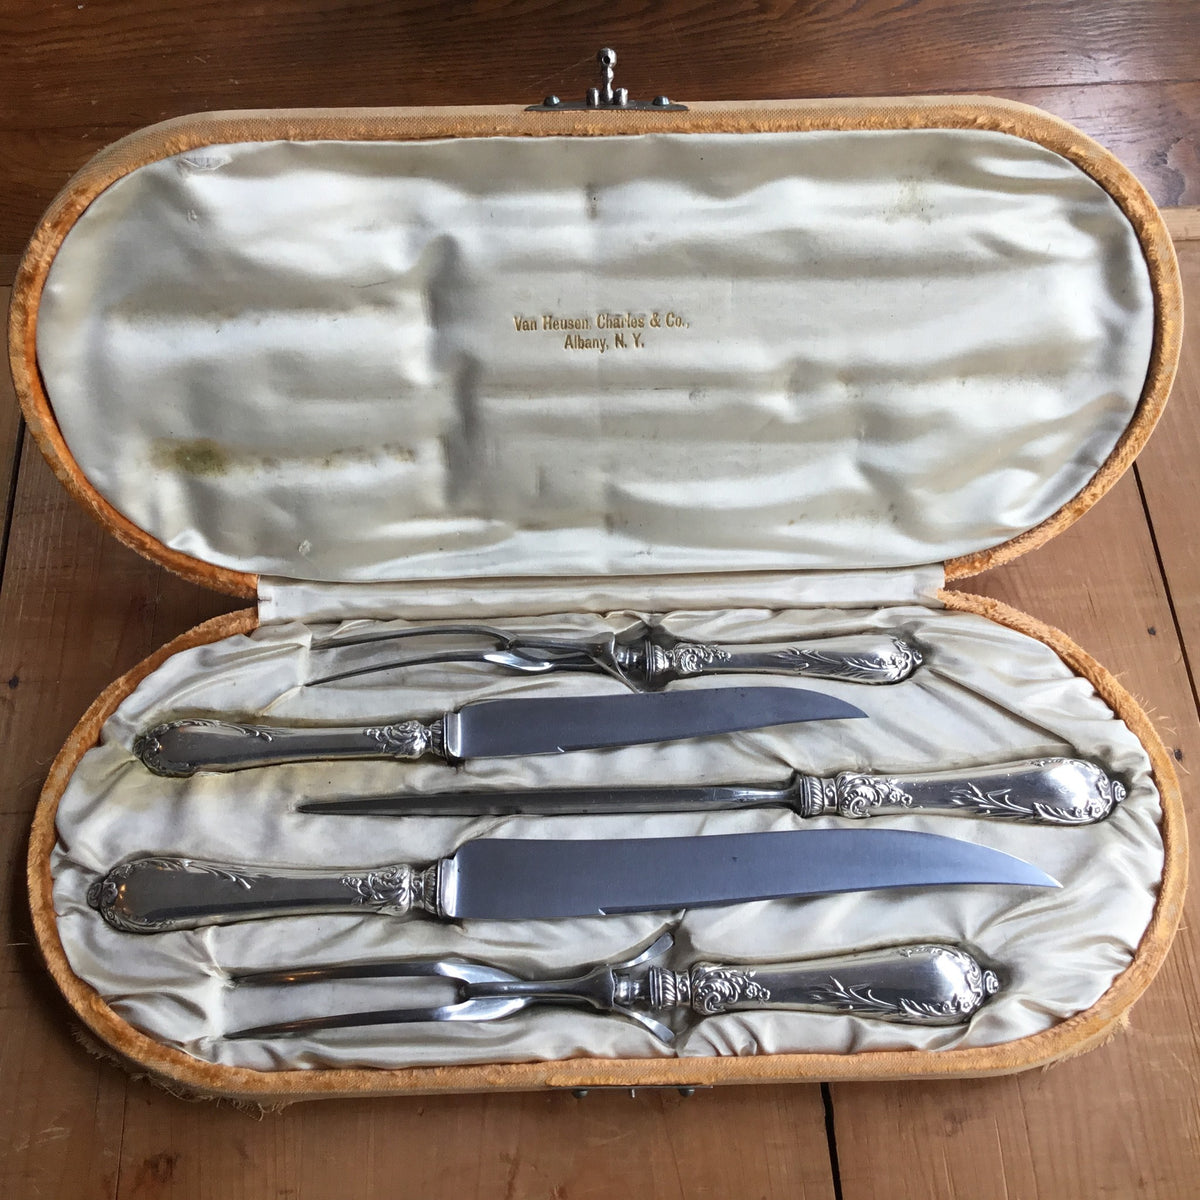 Landers Frary & Clark Aetna Works 5-piece Carving Set Silver-plated & Carbon Steel circa 1890-1910